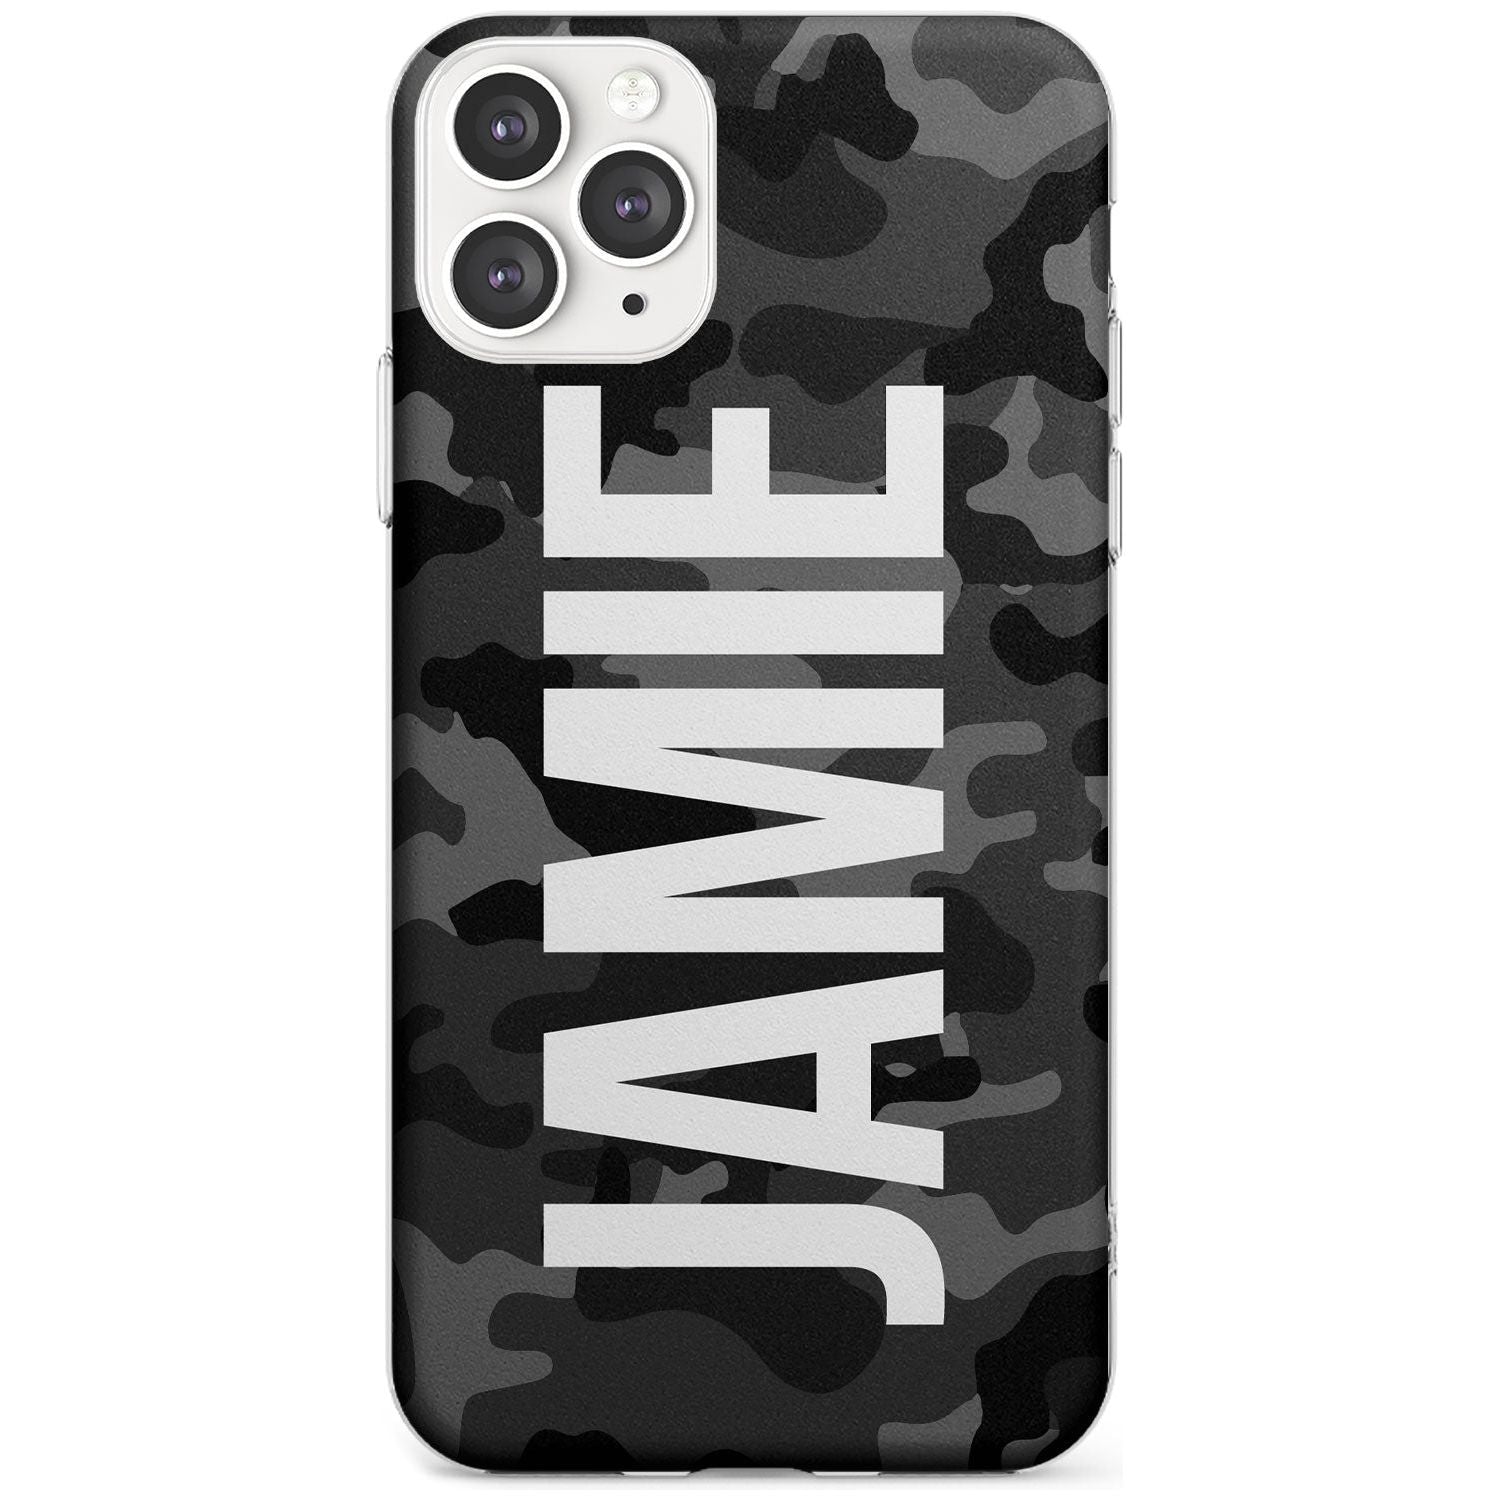 Vertical Name Personalised Black Camouflage Slim TPU Phone Case for iPhone 11 Pro Max